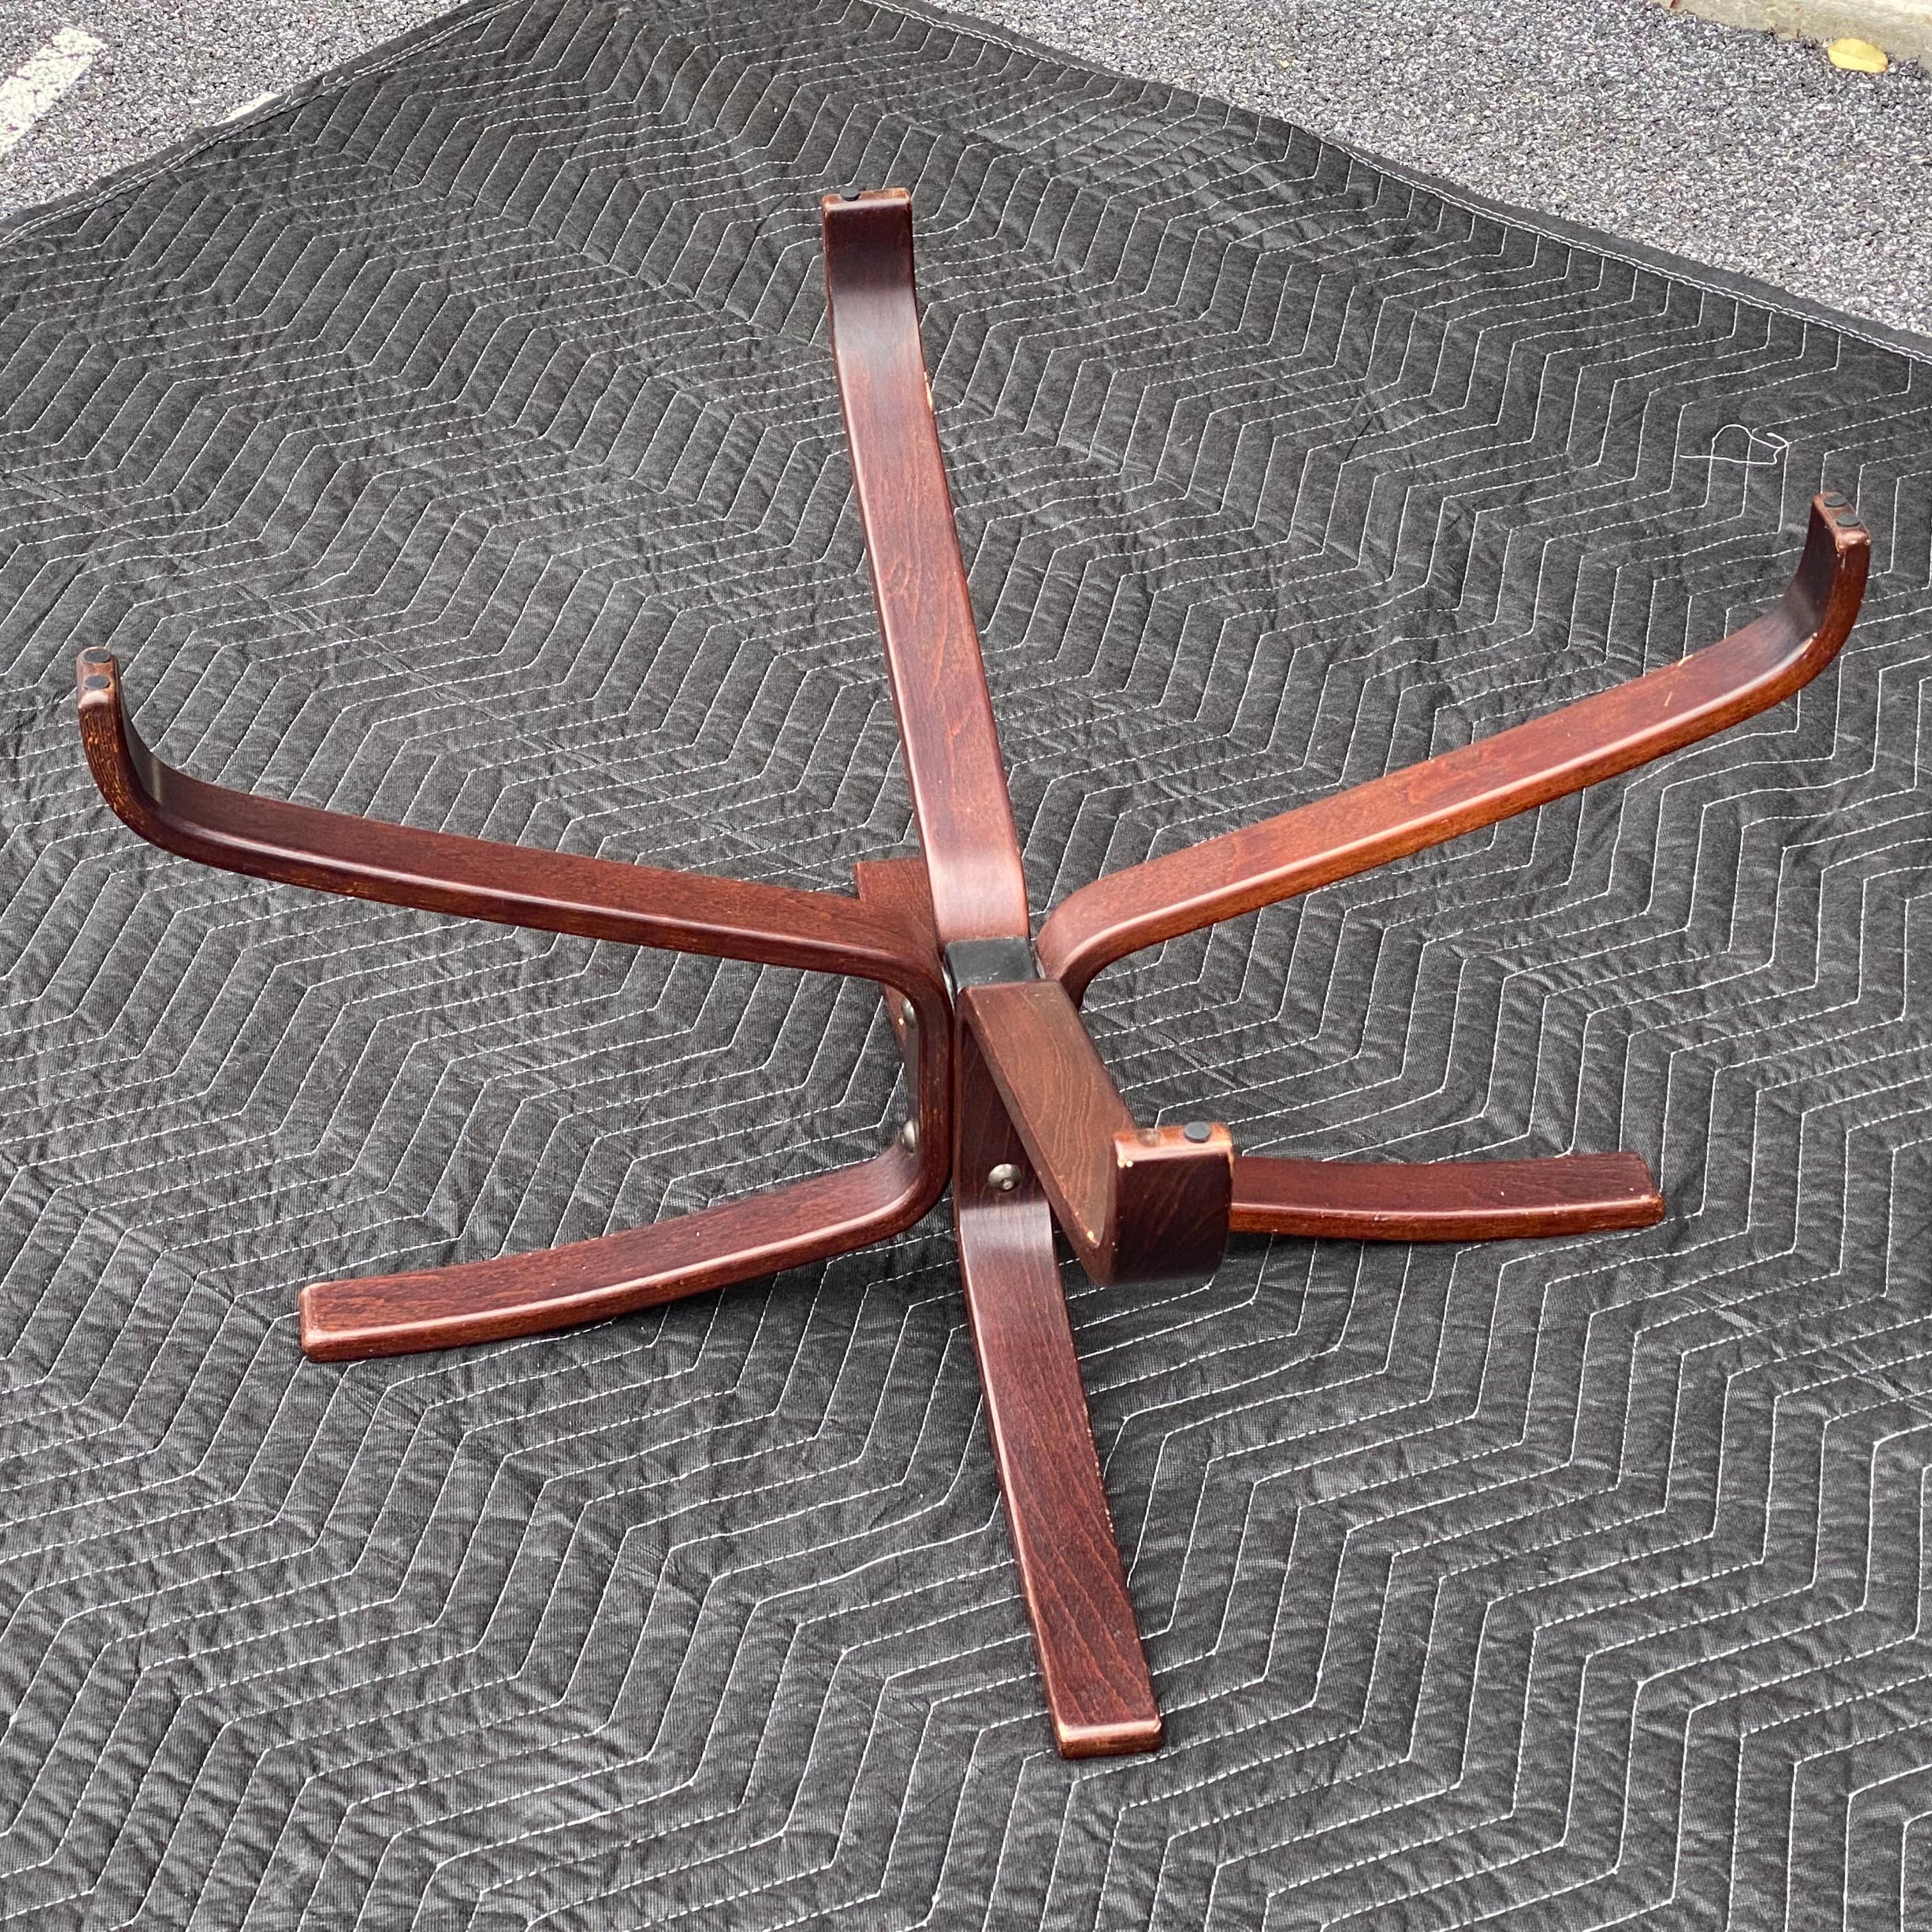 Vatne Mobler “Falcon” Coffee Table Base in rosewood circa 1970. 

Will be shipped disassembled and very easy to assemble with the eight bolts and the Allen wrench which will be included. The listing is for the base only as pictured and can fit a